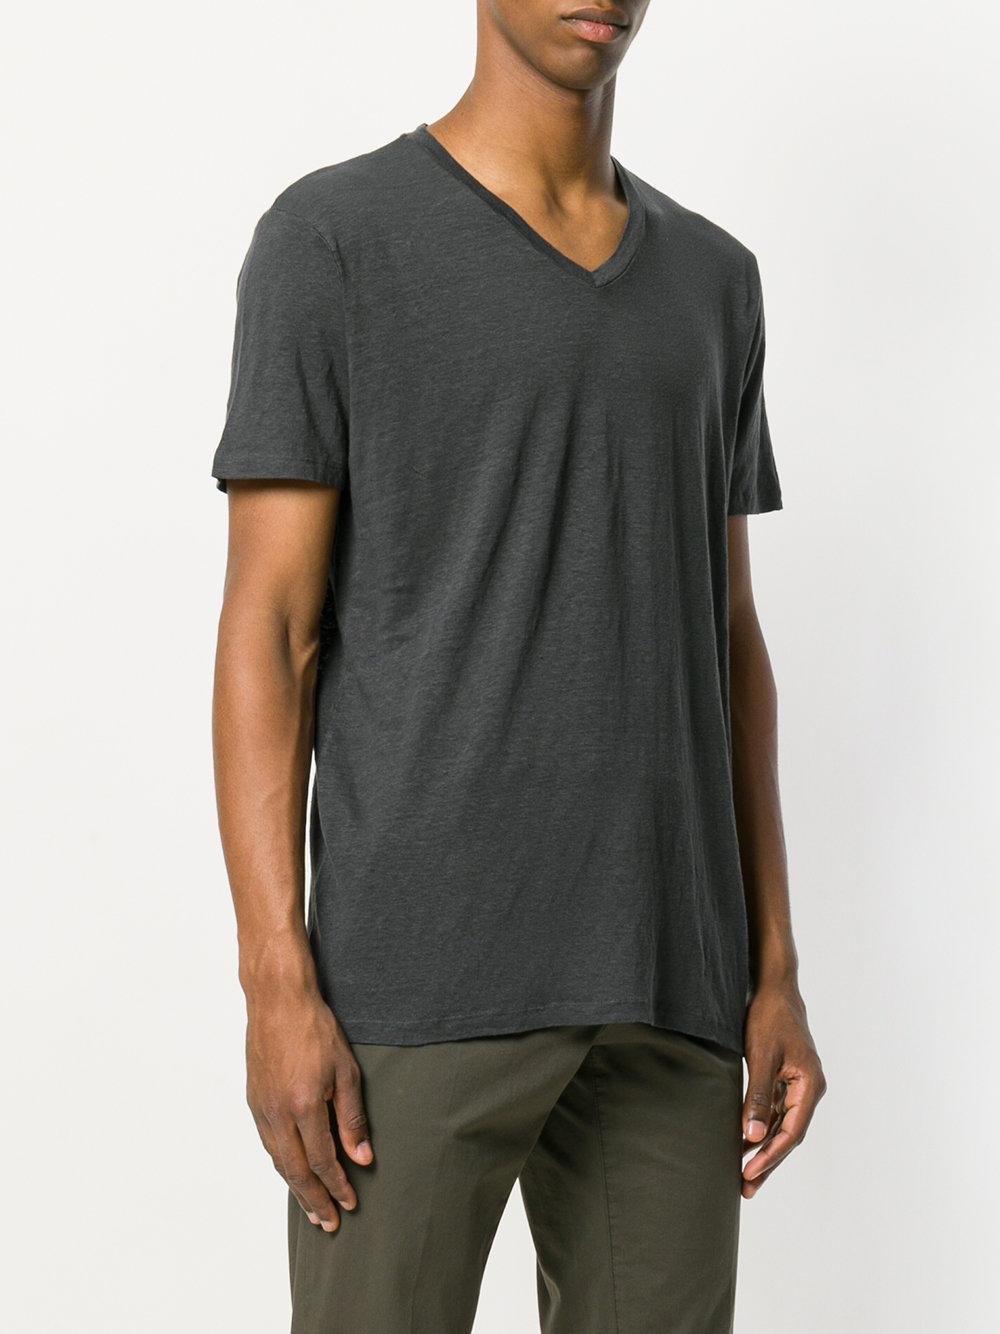 Etro V-neck Loose Fit T-shirt in Grey (Gray) for Men - Lyst